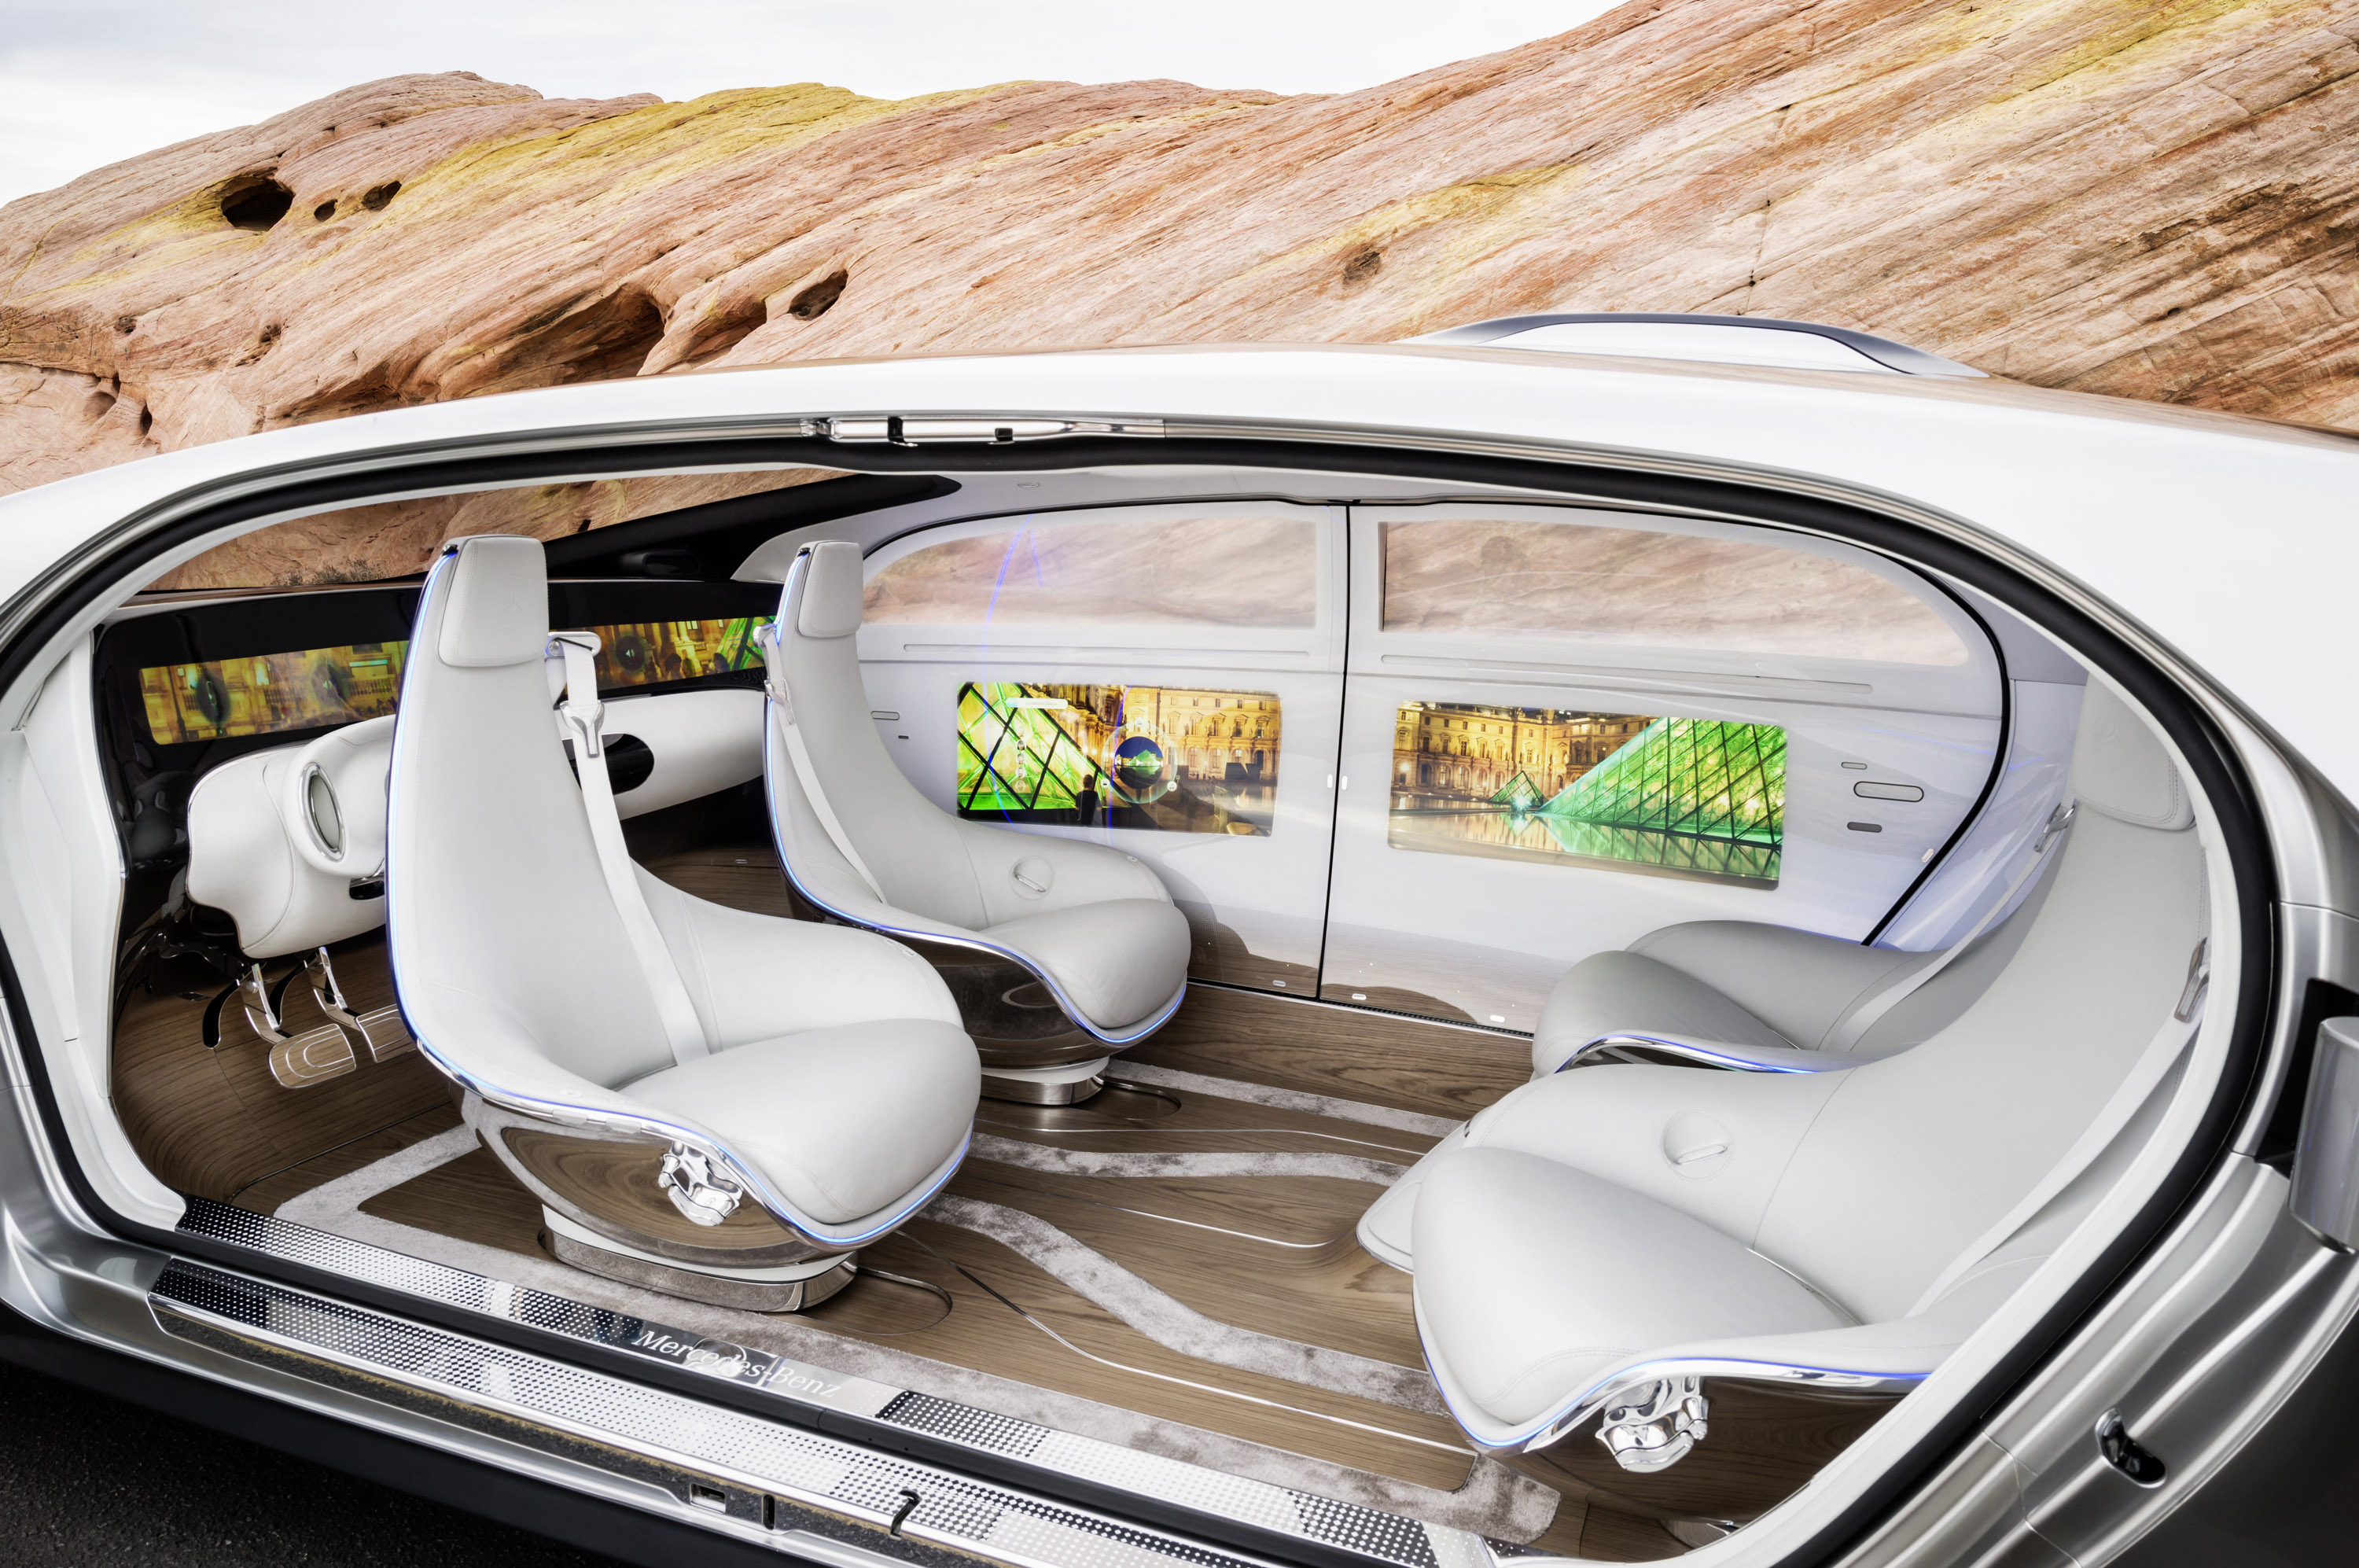 Mercedes-Benz F015 Luxury in Motion Concept photo #51